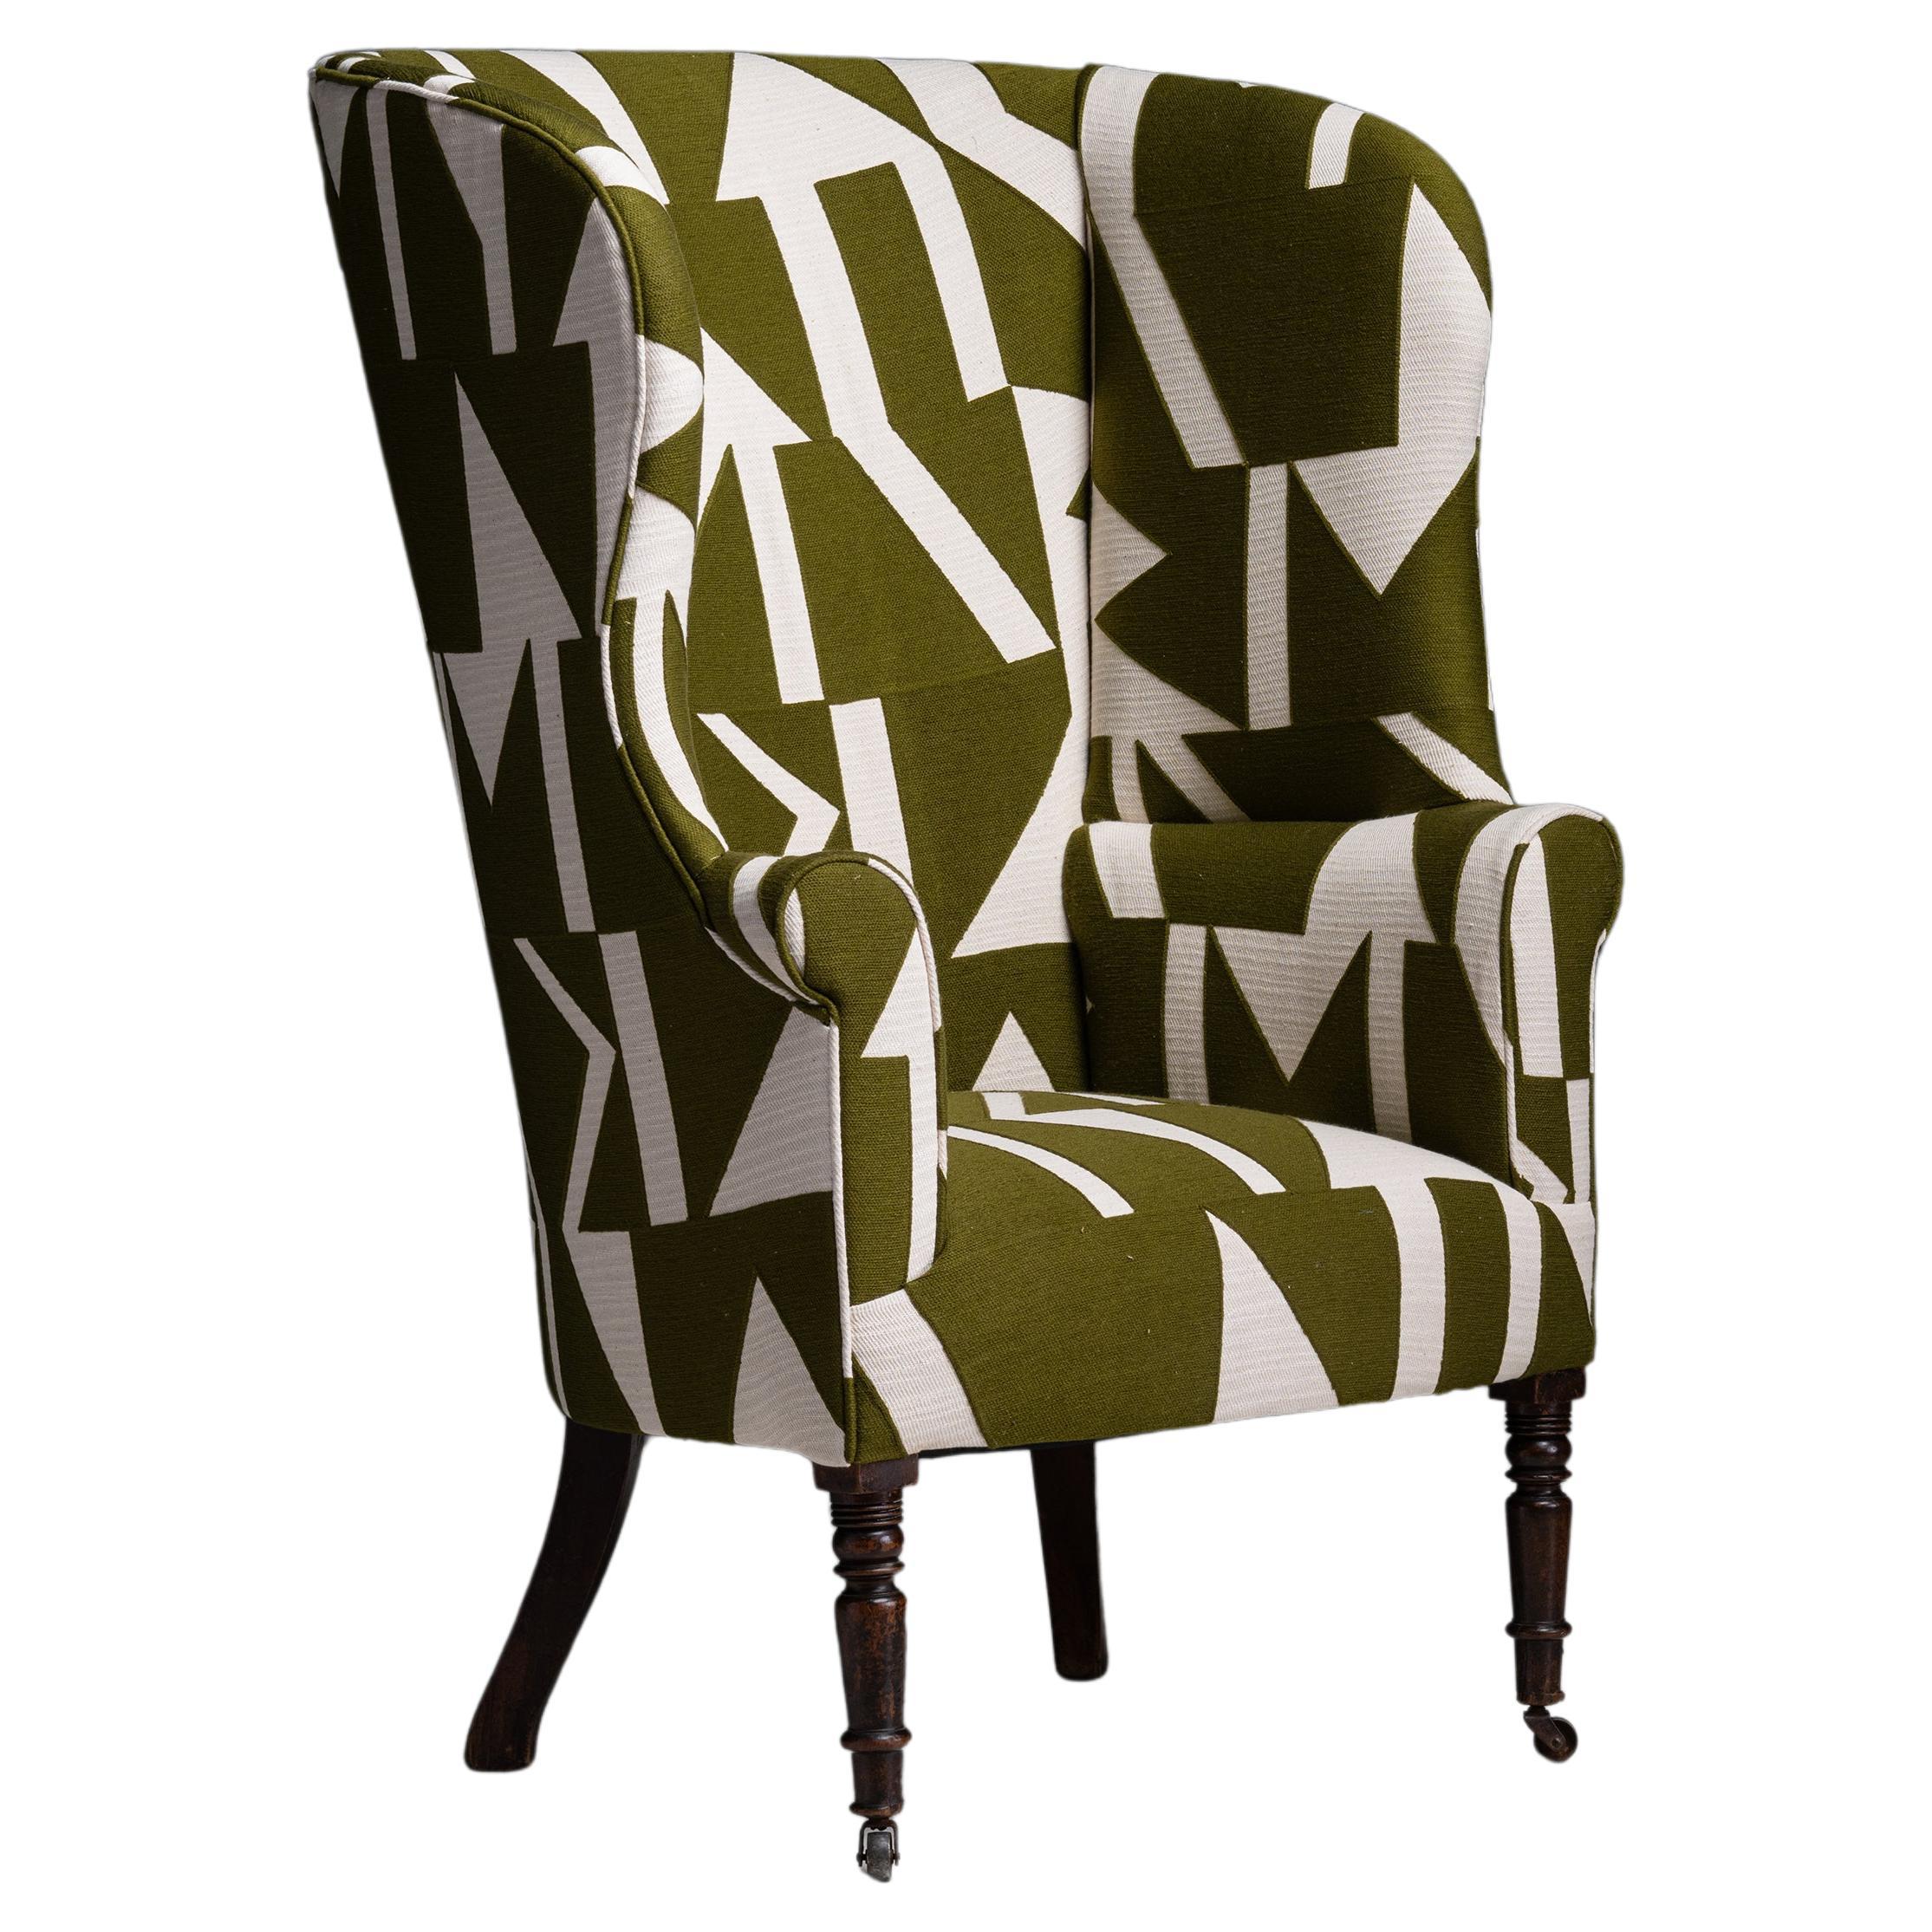 Armchair in Graphic Linen by Pierre Frey, England circa 1760